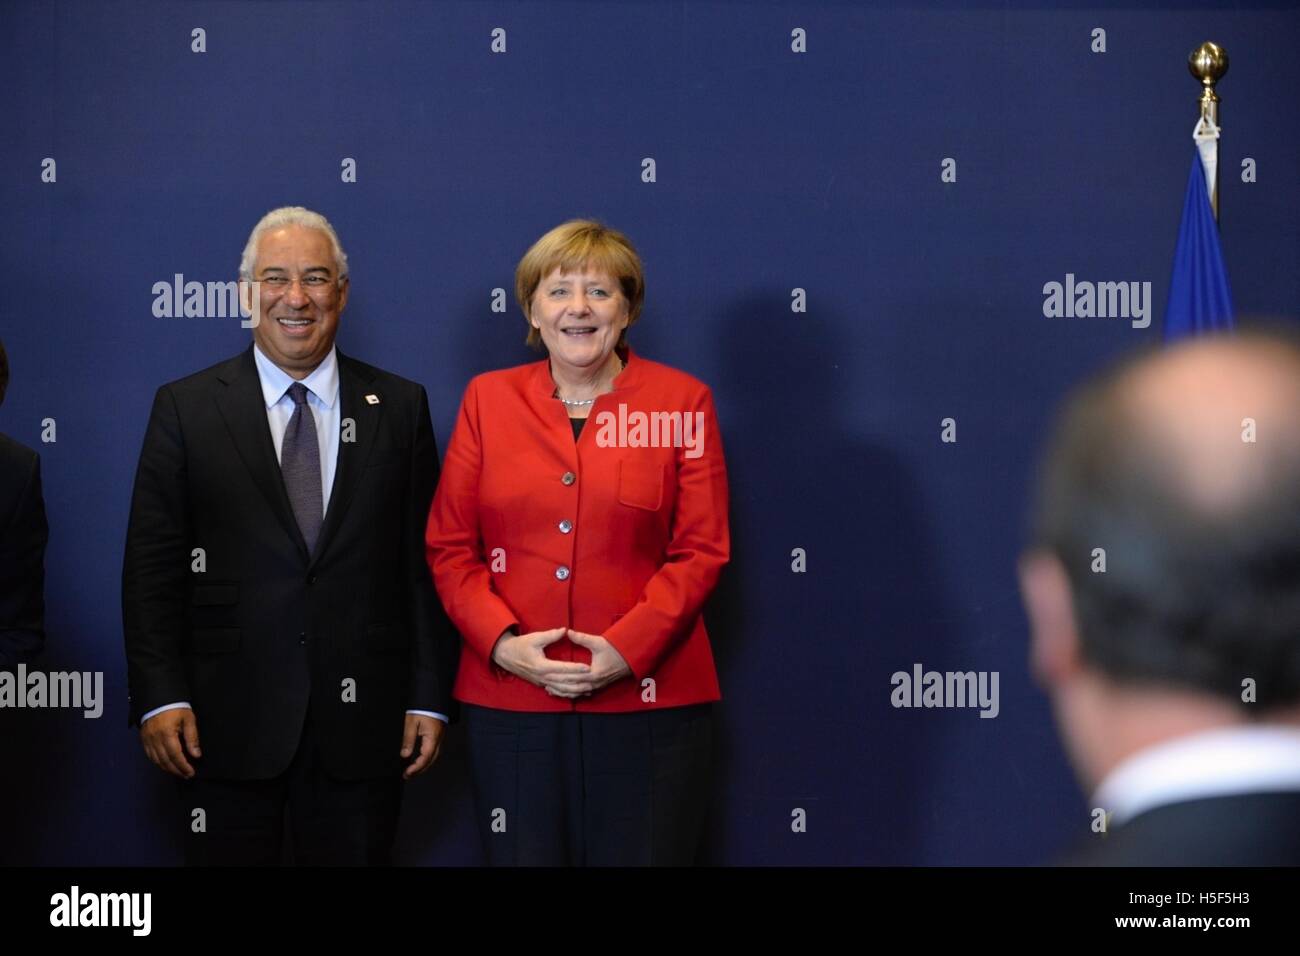 Brussels, Belgium. 20th Oct, 2016. Germany Chancellor Angela Merkel (left) and Portugal Prime Minister Antonio Costa (right) pose for photographers during the EU summit of prime ministers in Brussels, Belgium, October 20, 2016. Credit:  Jakub Dospiva/CTK Photo/Alamy Live News Stock Photo